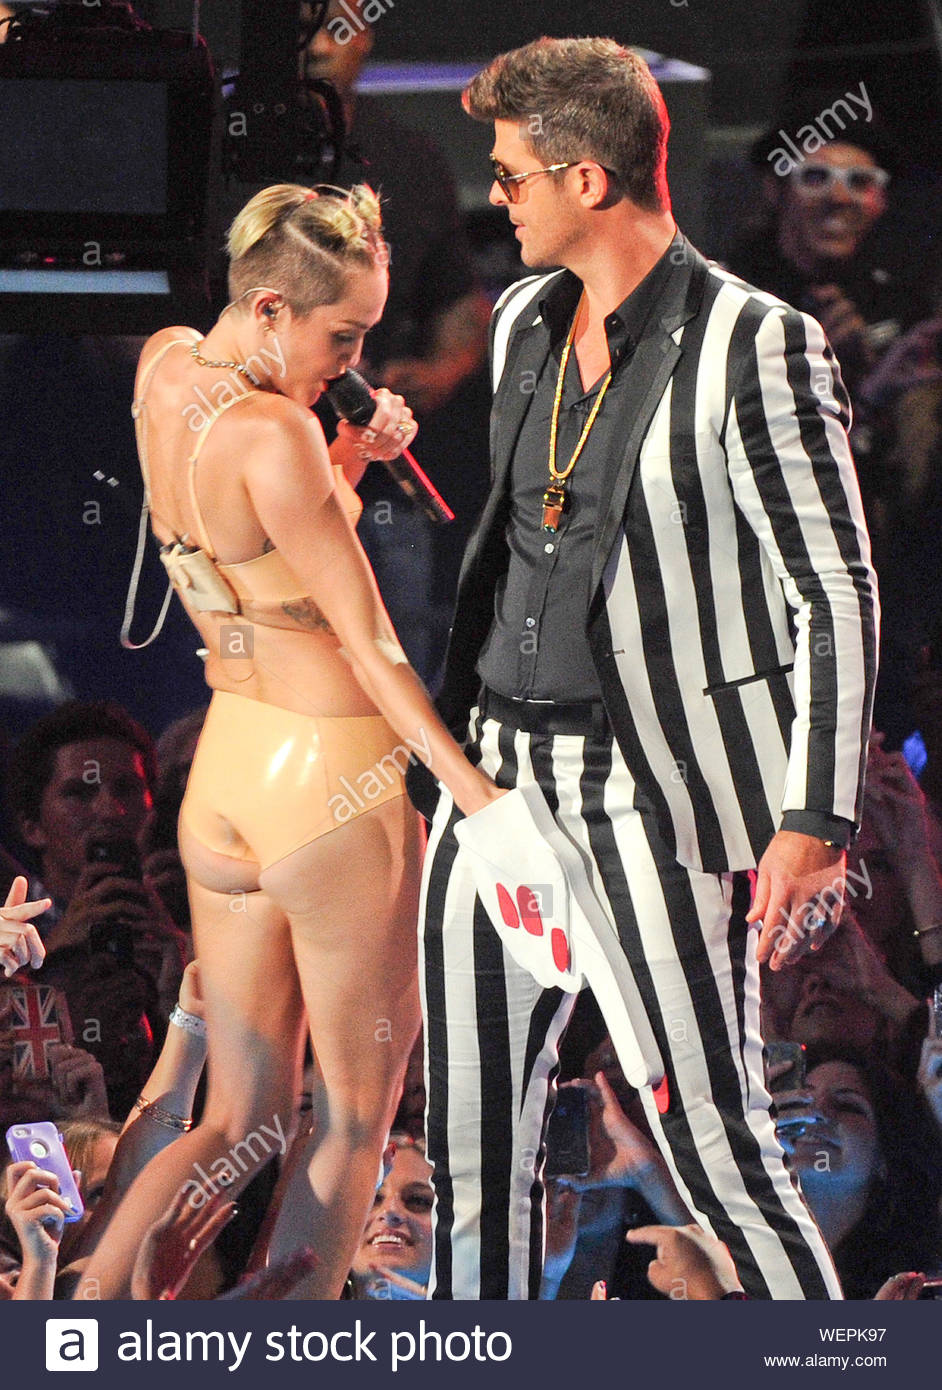 https://c8.alamy.com/comp/WEPK97/new-york-ny-miley-cyrus-and-robin-thicke-onstage-during-the-2013-mtv-video-music-awards-at-the-barclay-center-thickes-much-talked-about-duet-with-the-we-cant-stop-singer-miley-cyrus-in-august-was-reportedly-a-big-test-in-his-longtime-relationship-with-ex-wife-paula-patton-the-miley-cyrus-fiasco-was-a-big-test-of-their-relationship-said-an-insider-he-asked-her-to-help-him-out-as-a-friend-and-a-wife-and-defend-him-and-the-performance-he-begged-her-to-speak-out-for-him-and-be-there-for-him-she-agreed-to-be-the-good-wife-after-he-begged-and-pleaded-the-source-continued-WEPK97.jpg